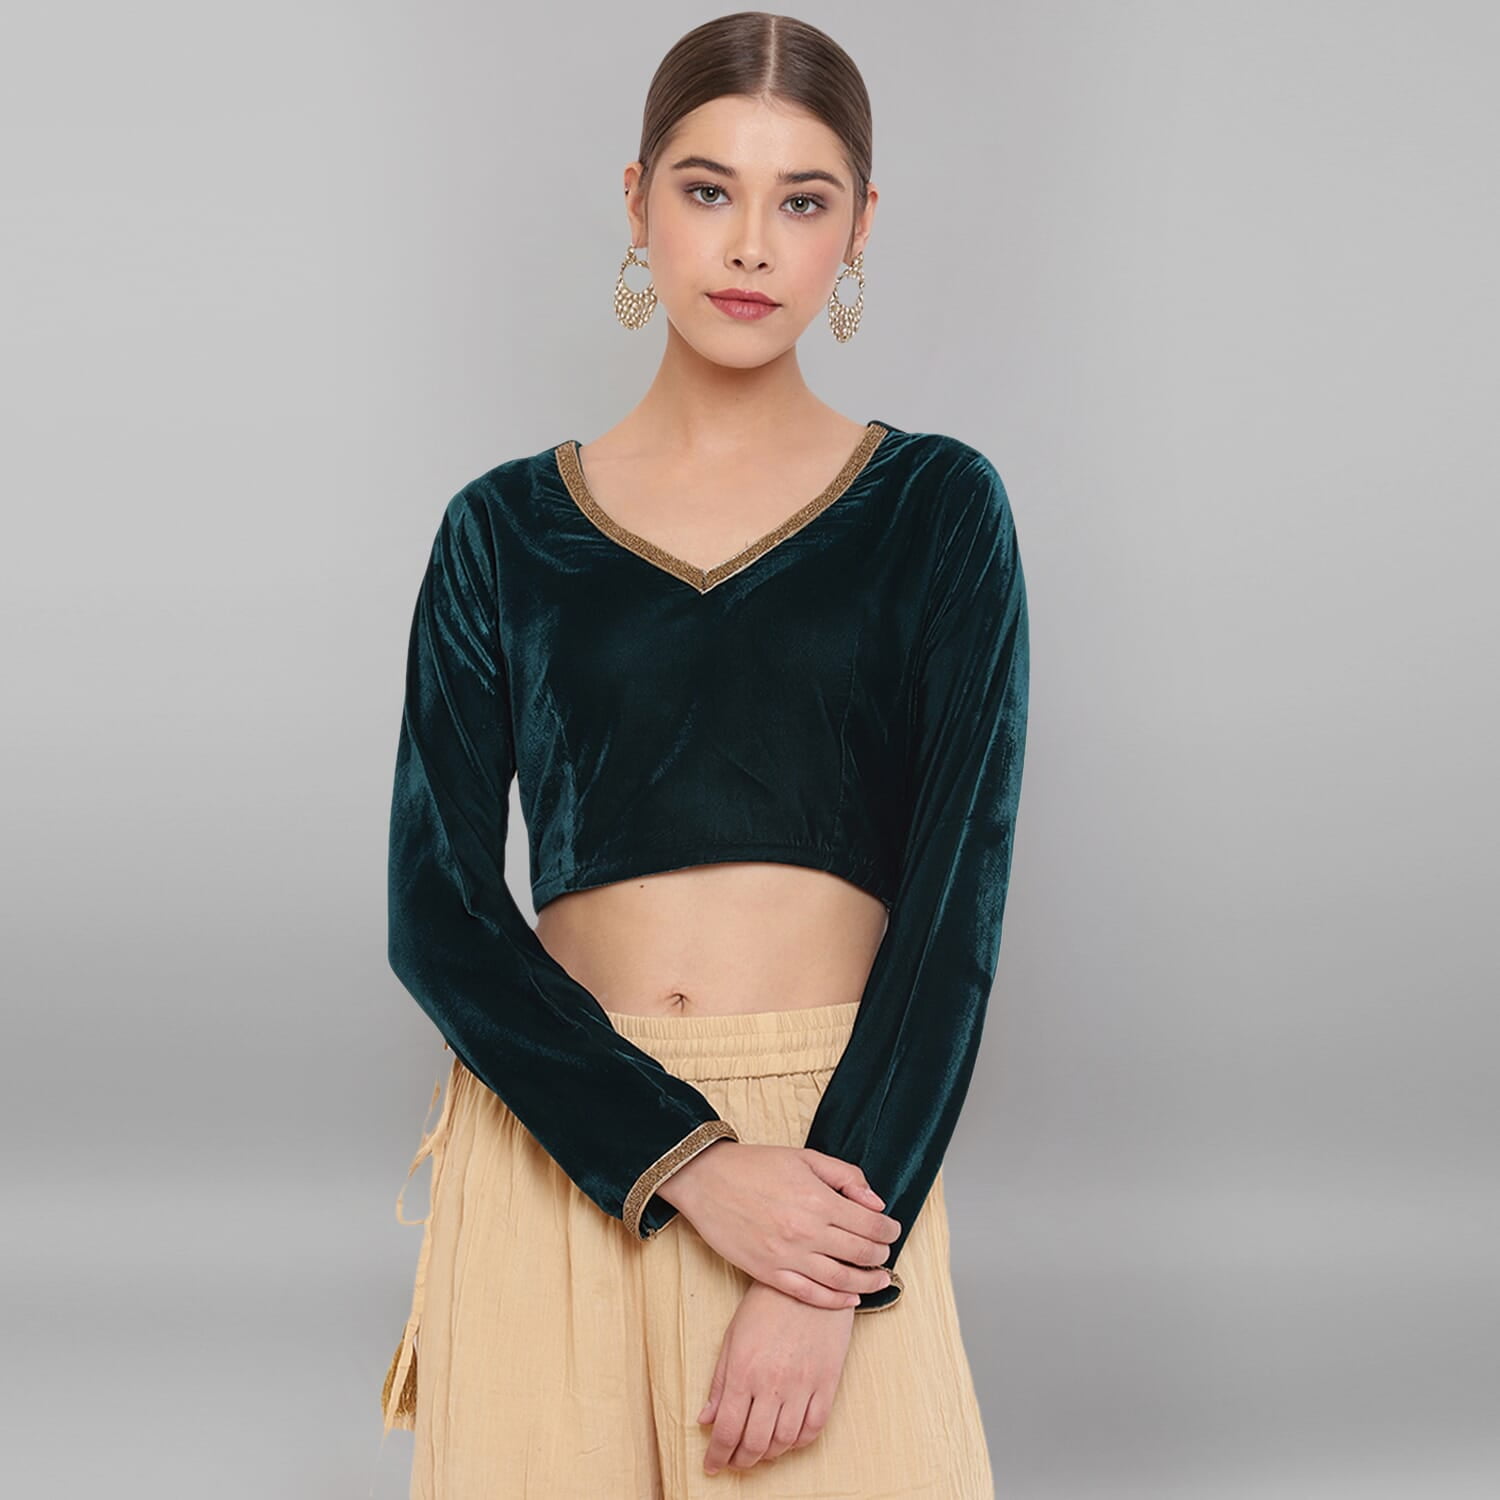 Yasvi Velvet Embroidered Blouse - House of Ayana